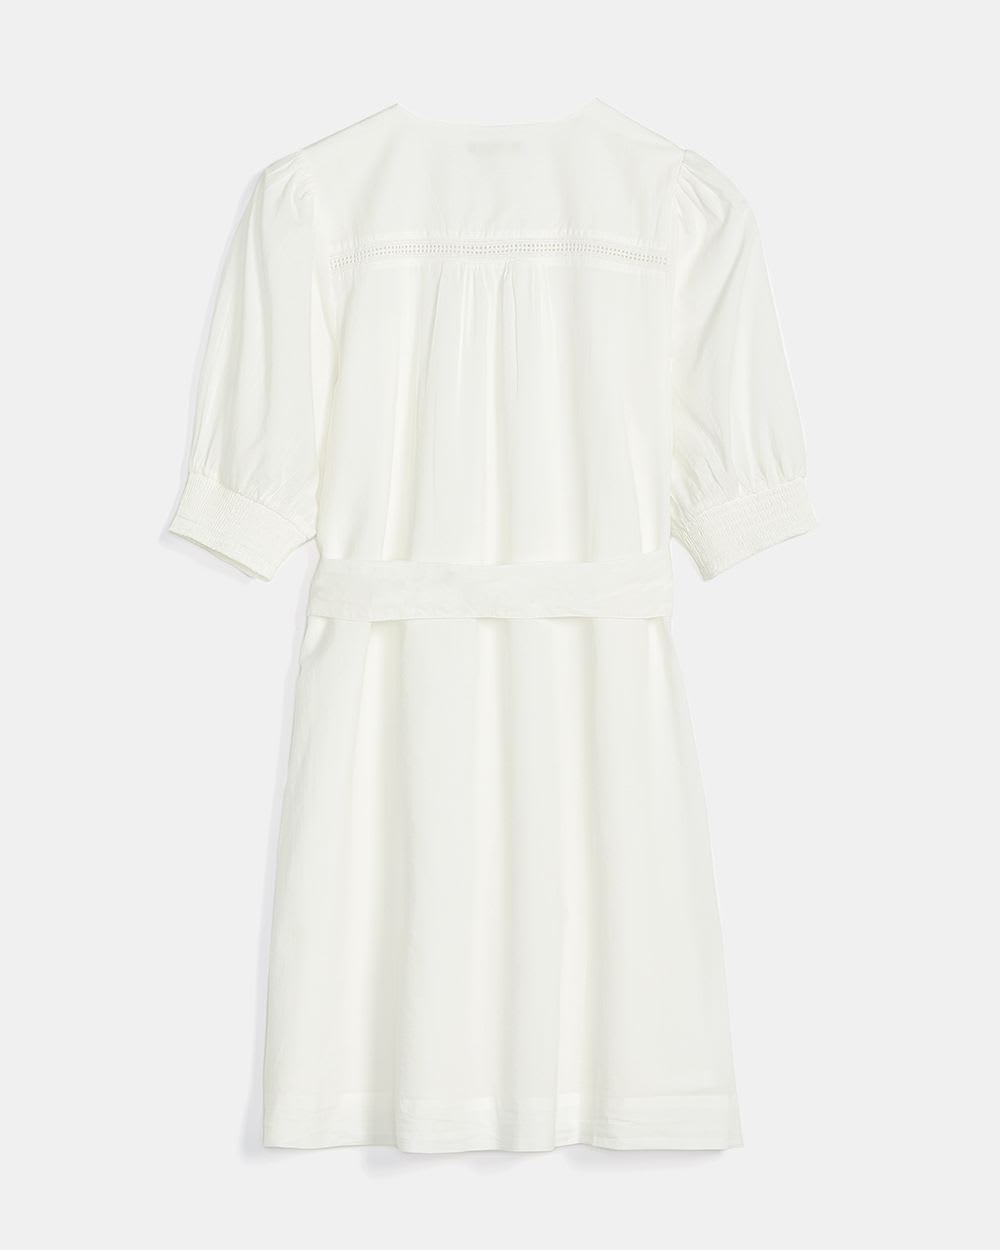 Cotton Voile Puffy Short Sleeve Dress with Front Placket